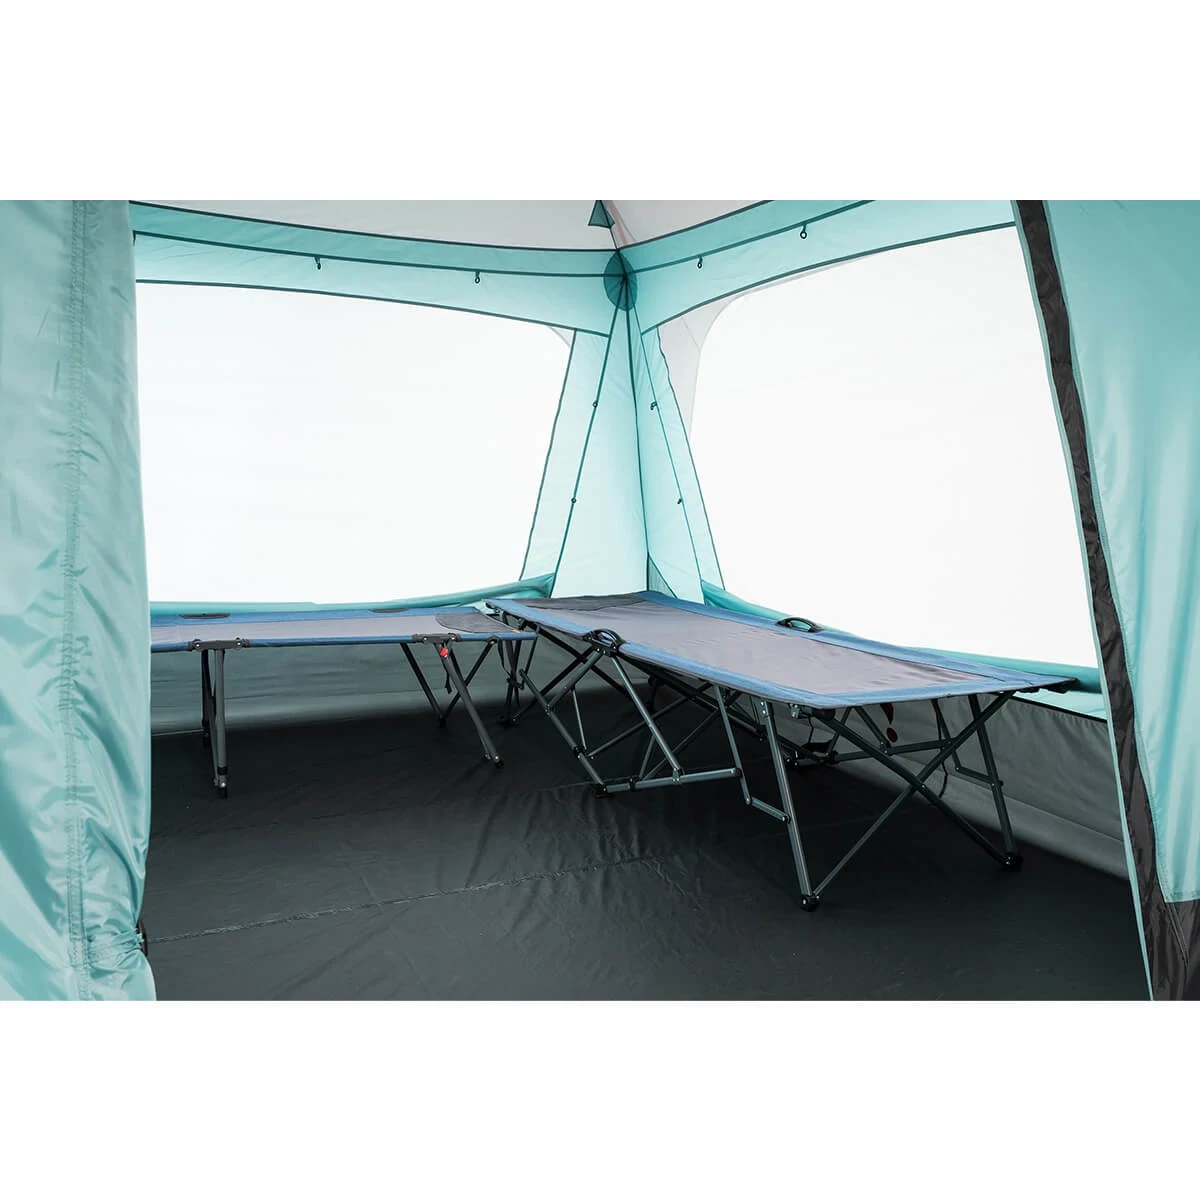 Jade Canyon X4 tent interior with cots set up